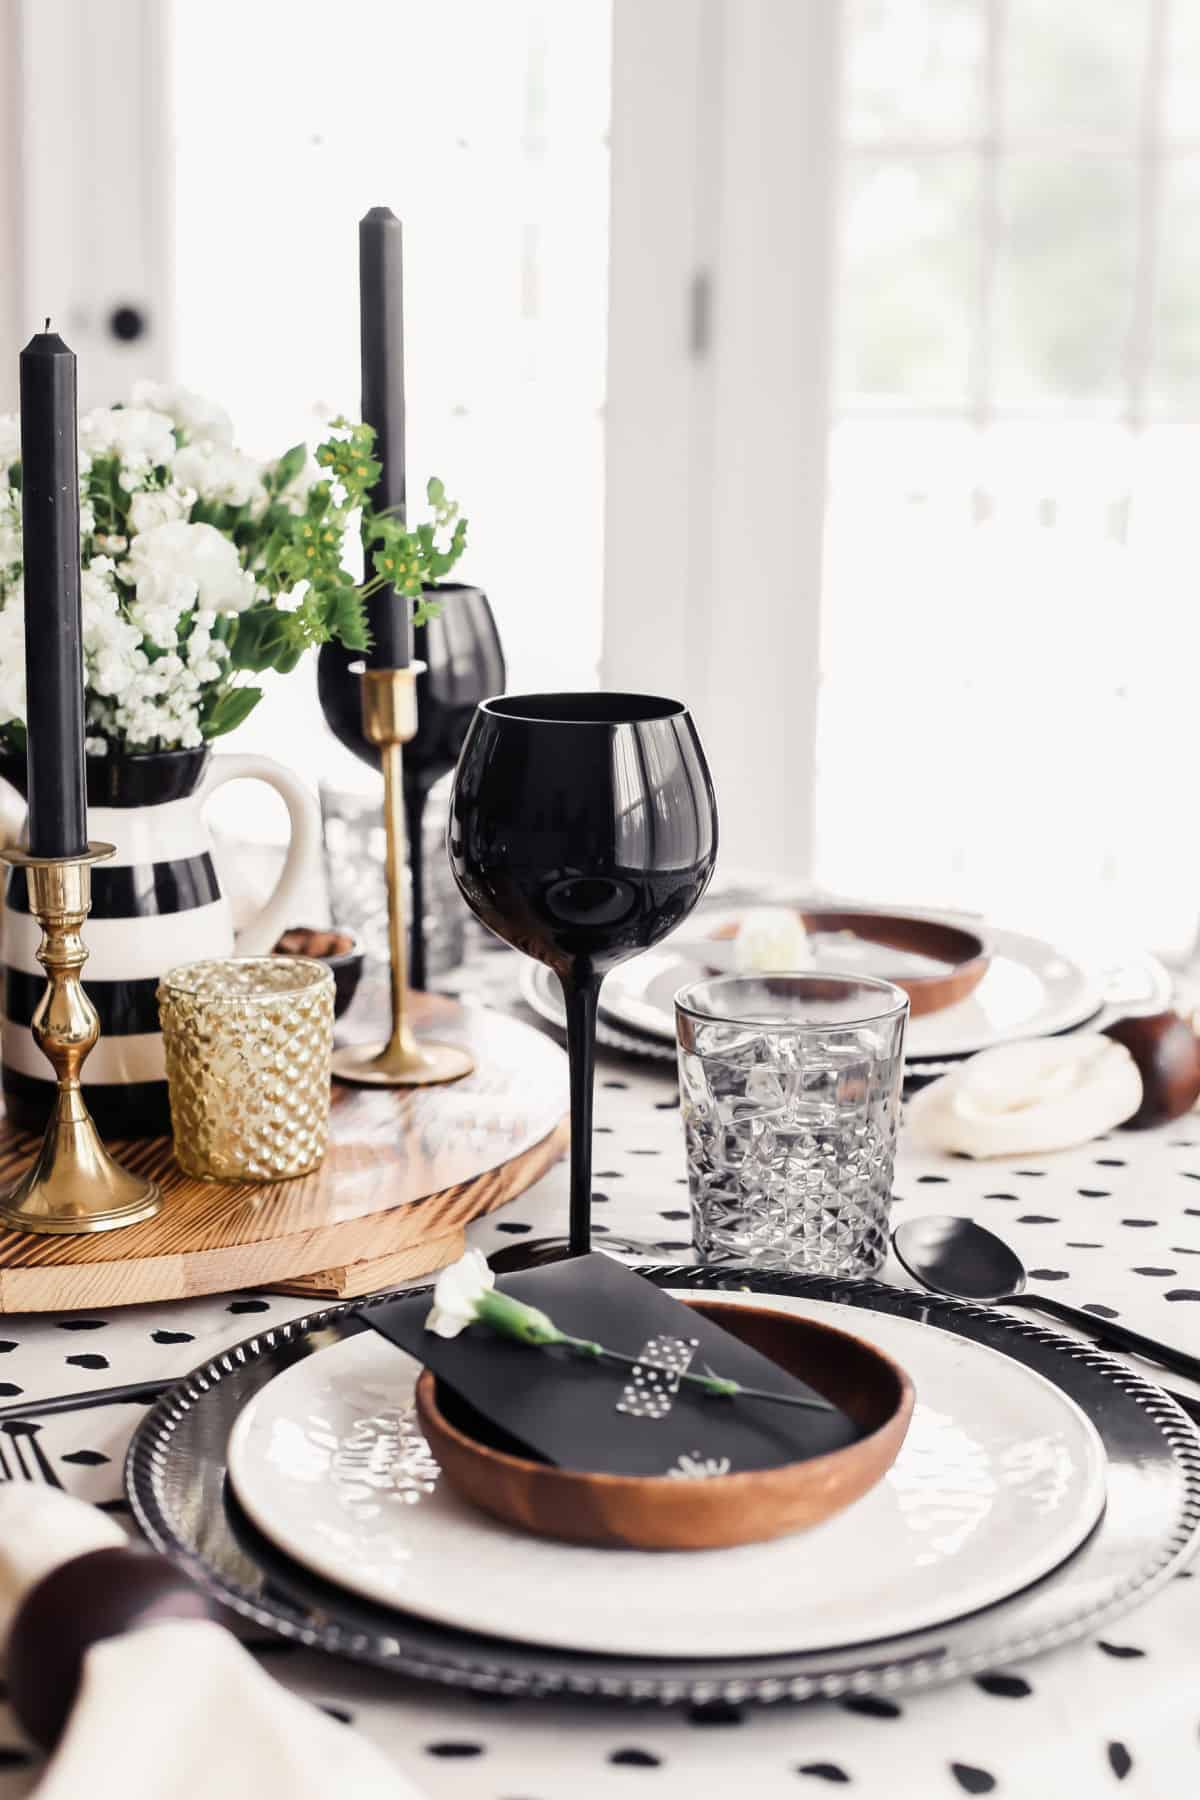 table setting with black charger, white plate, wood small plate